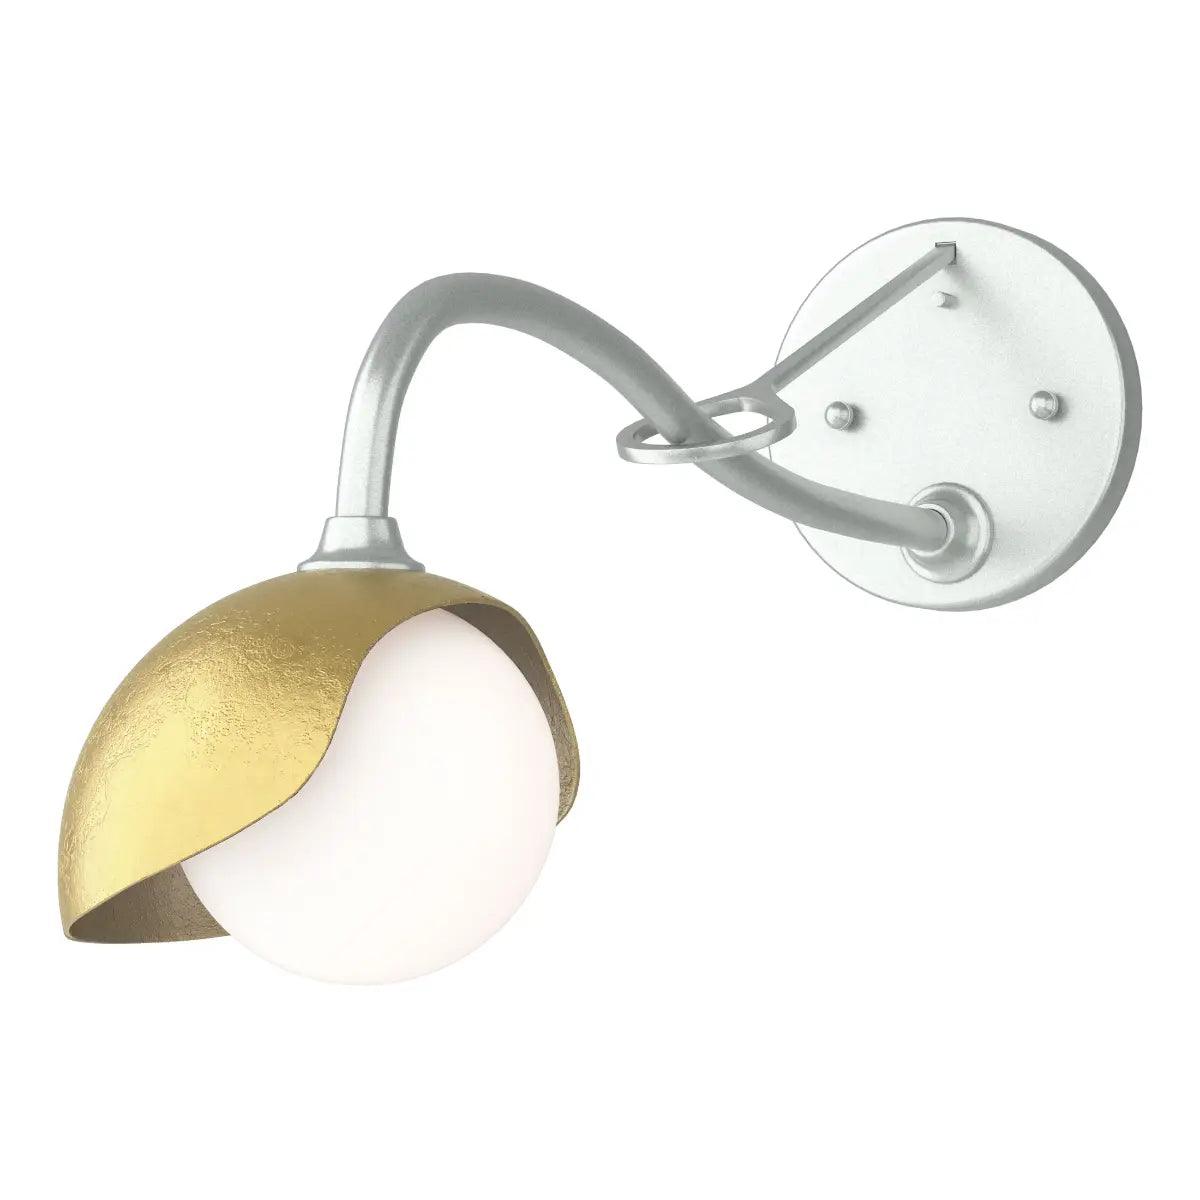 Brooklyn 10 in. Armed Sconce Vintage Platinum finish Single Shade